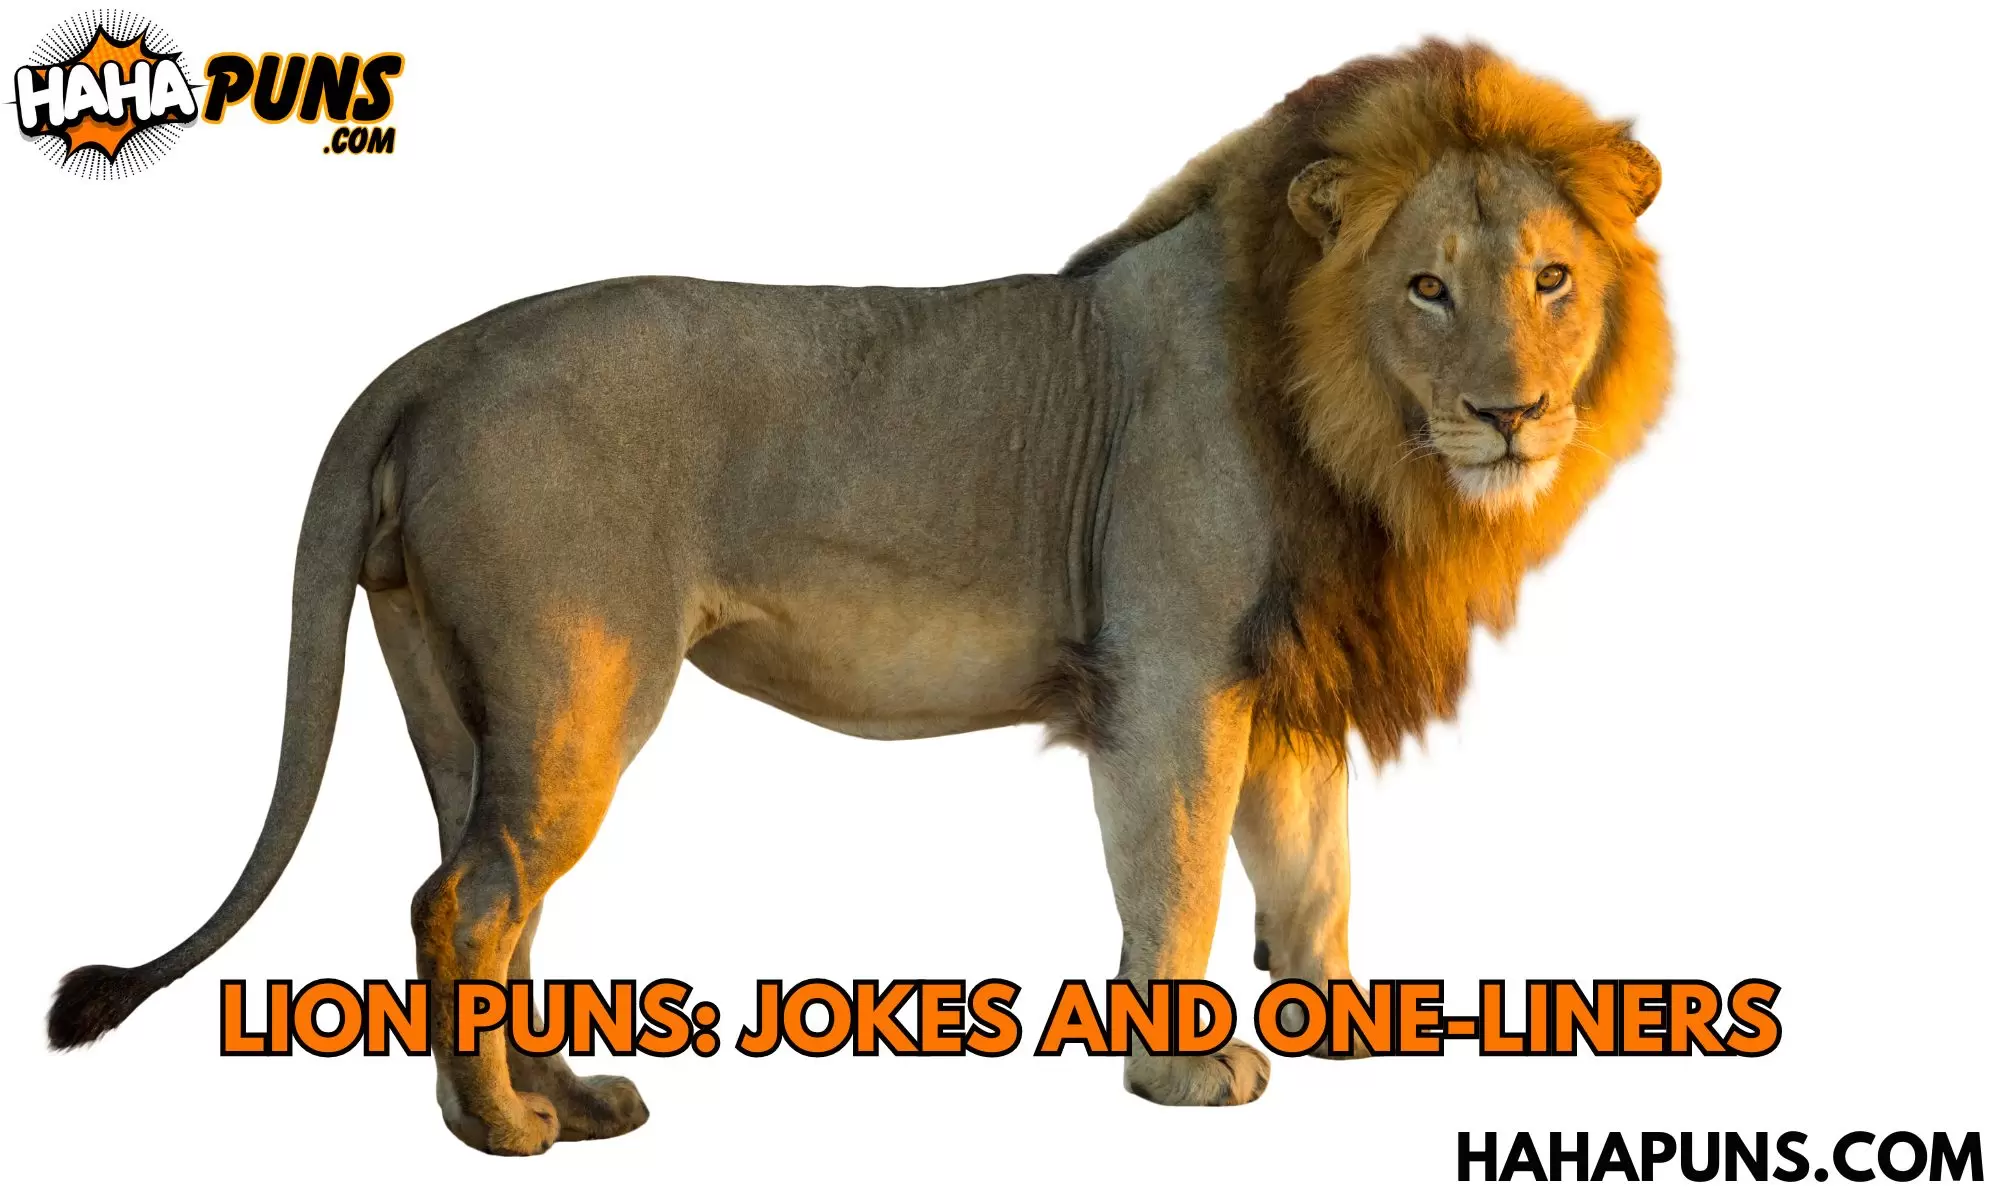 Lion Puns: Jokes And One-liners